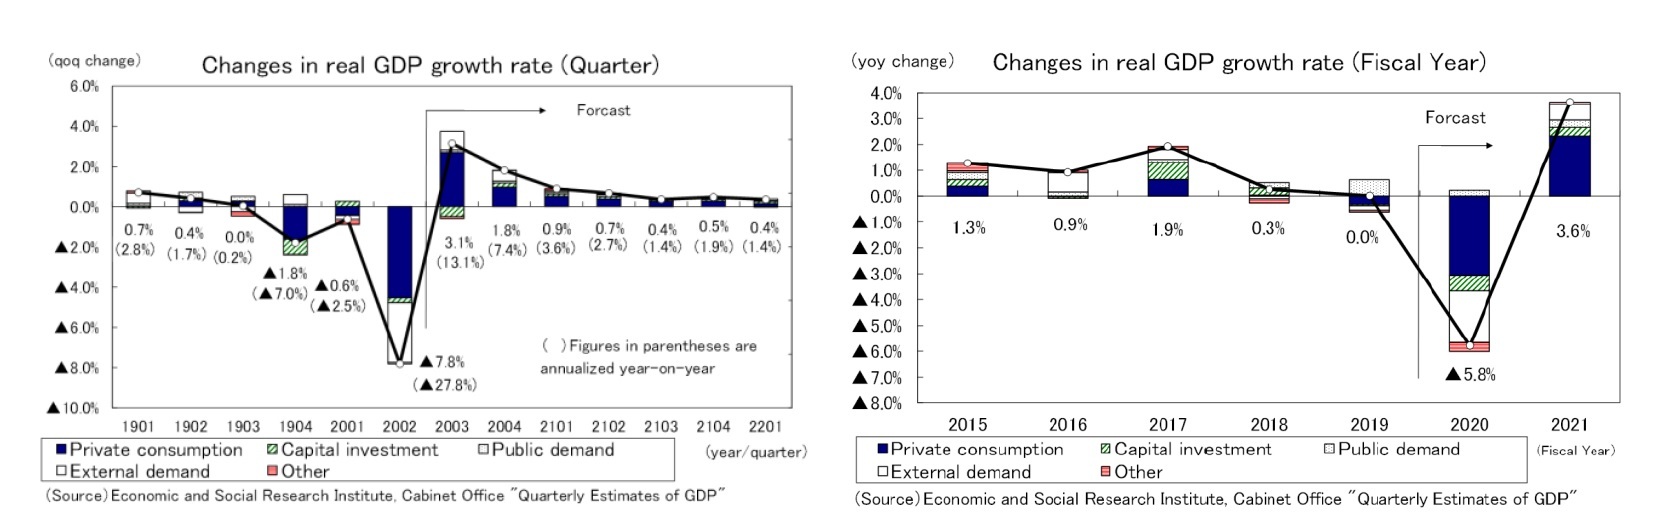 Changes in the real GDP growth rate(Quarter)/Changes in the real GDP growth rate(Fiscal Year)